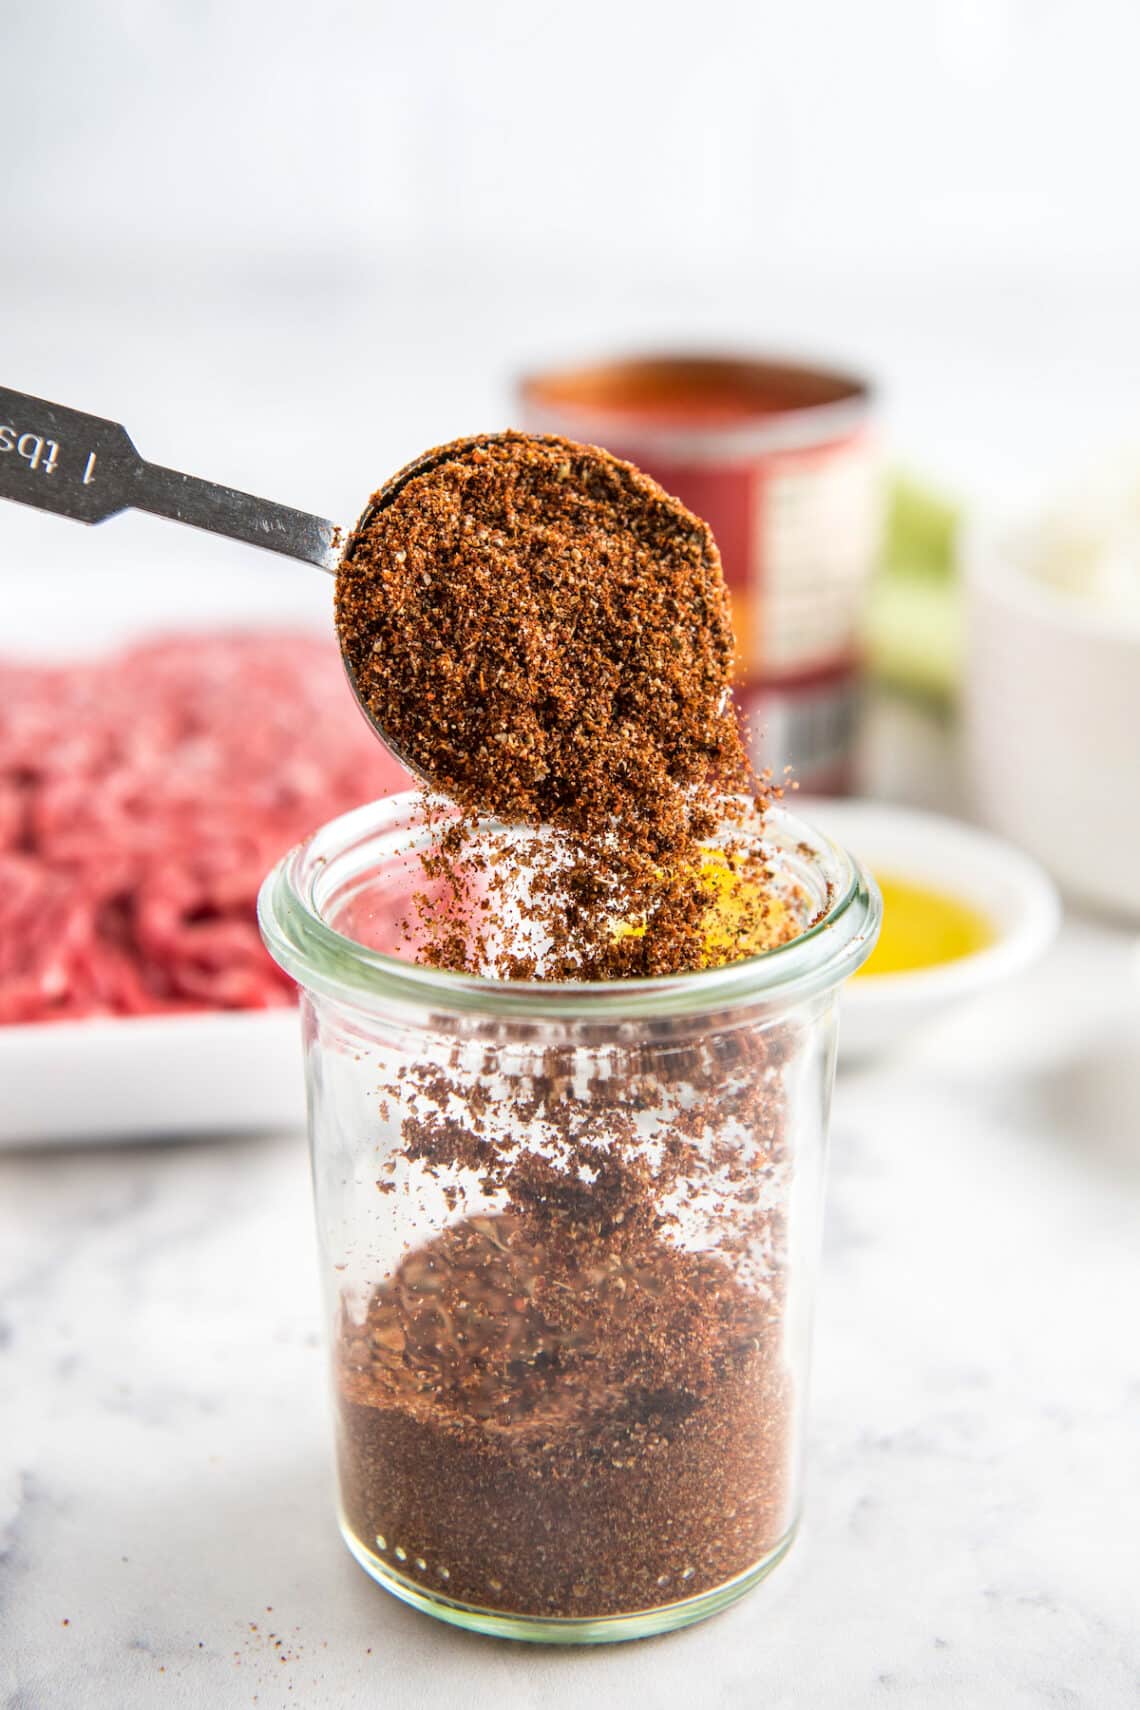 Homemade chili seasoning recipe in a glass jar with a spoon scooping out a serving.